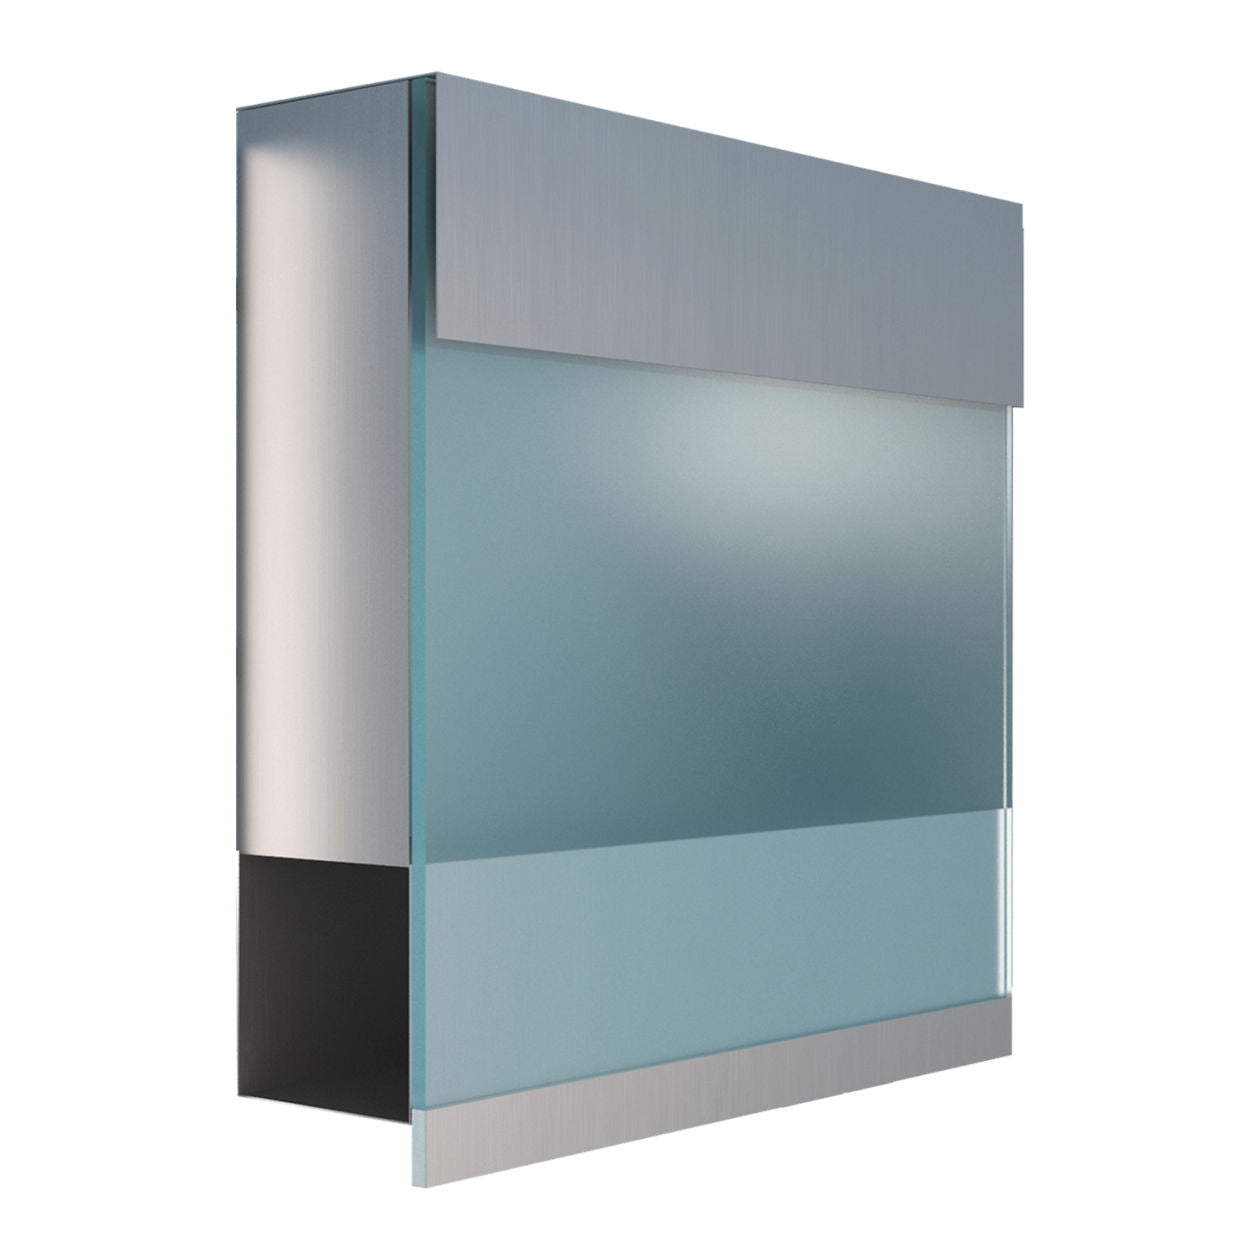 MANHATTAN by Bravios - Wall-mounted stainless steel mailbox with translucent blue front panel